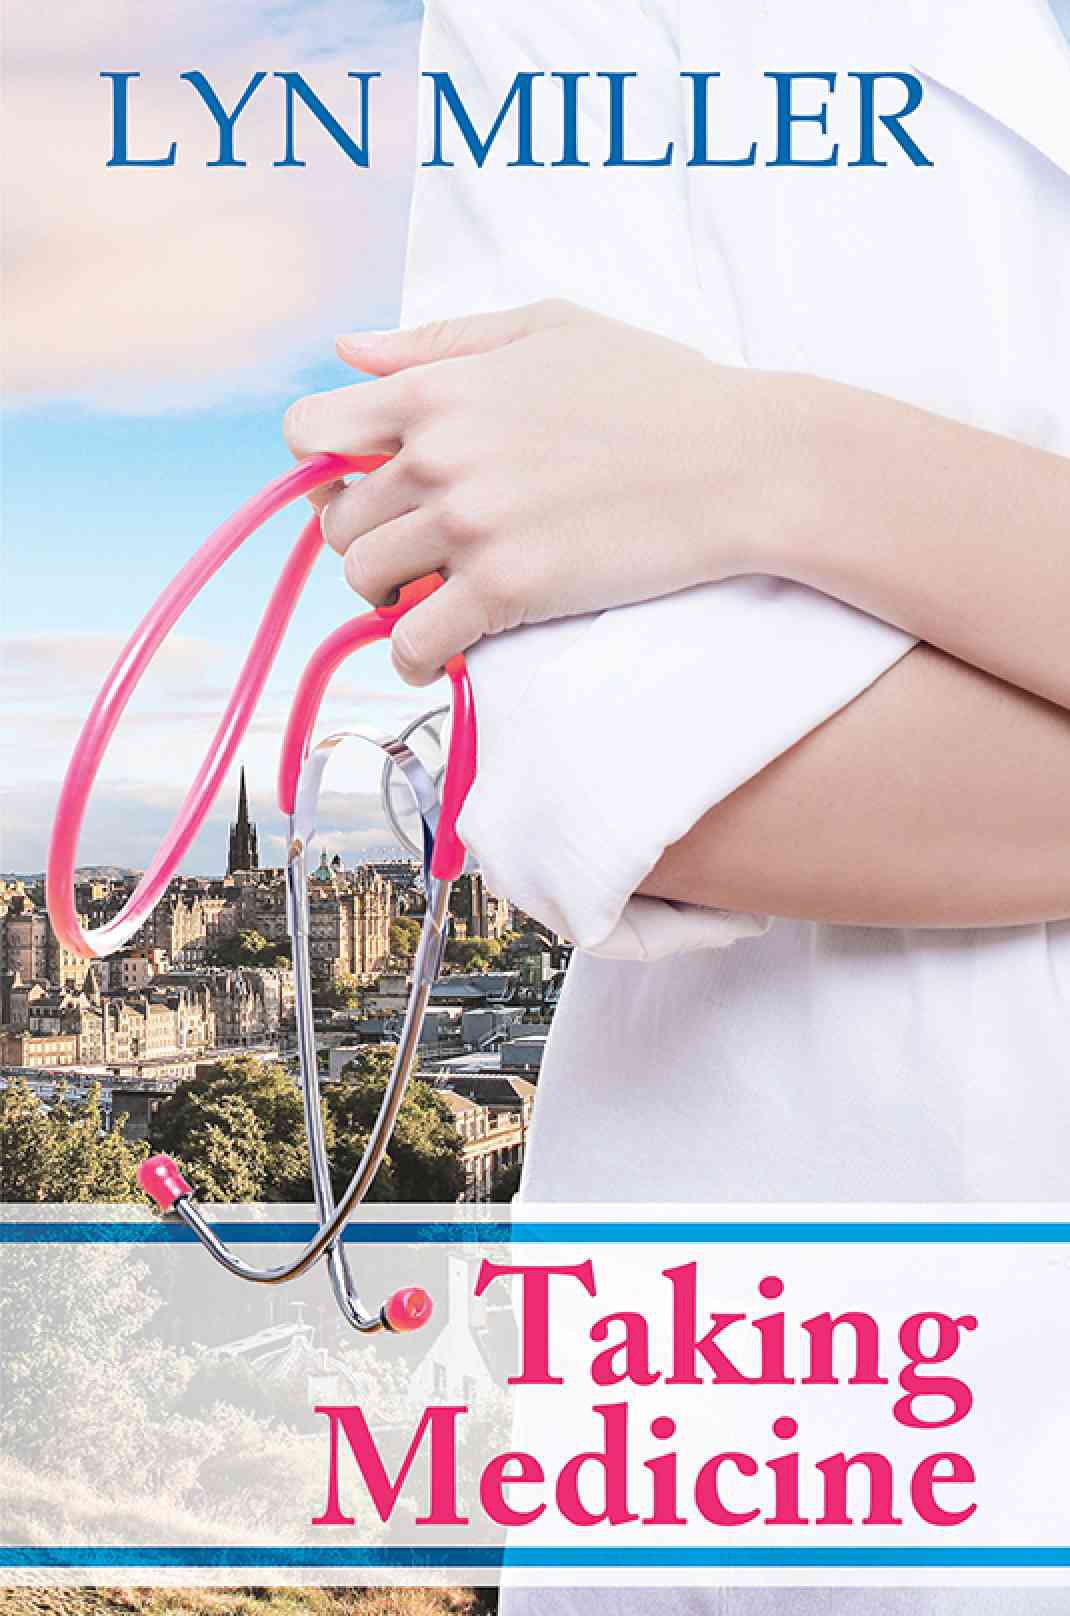 A Reviewer calls ‘Taking Medicine’ Heartbreaking